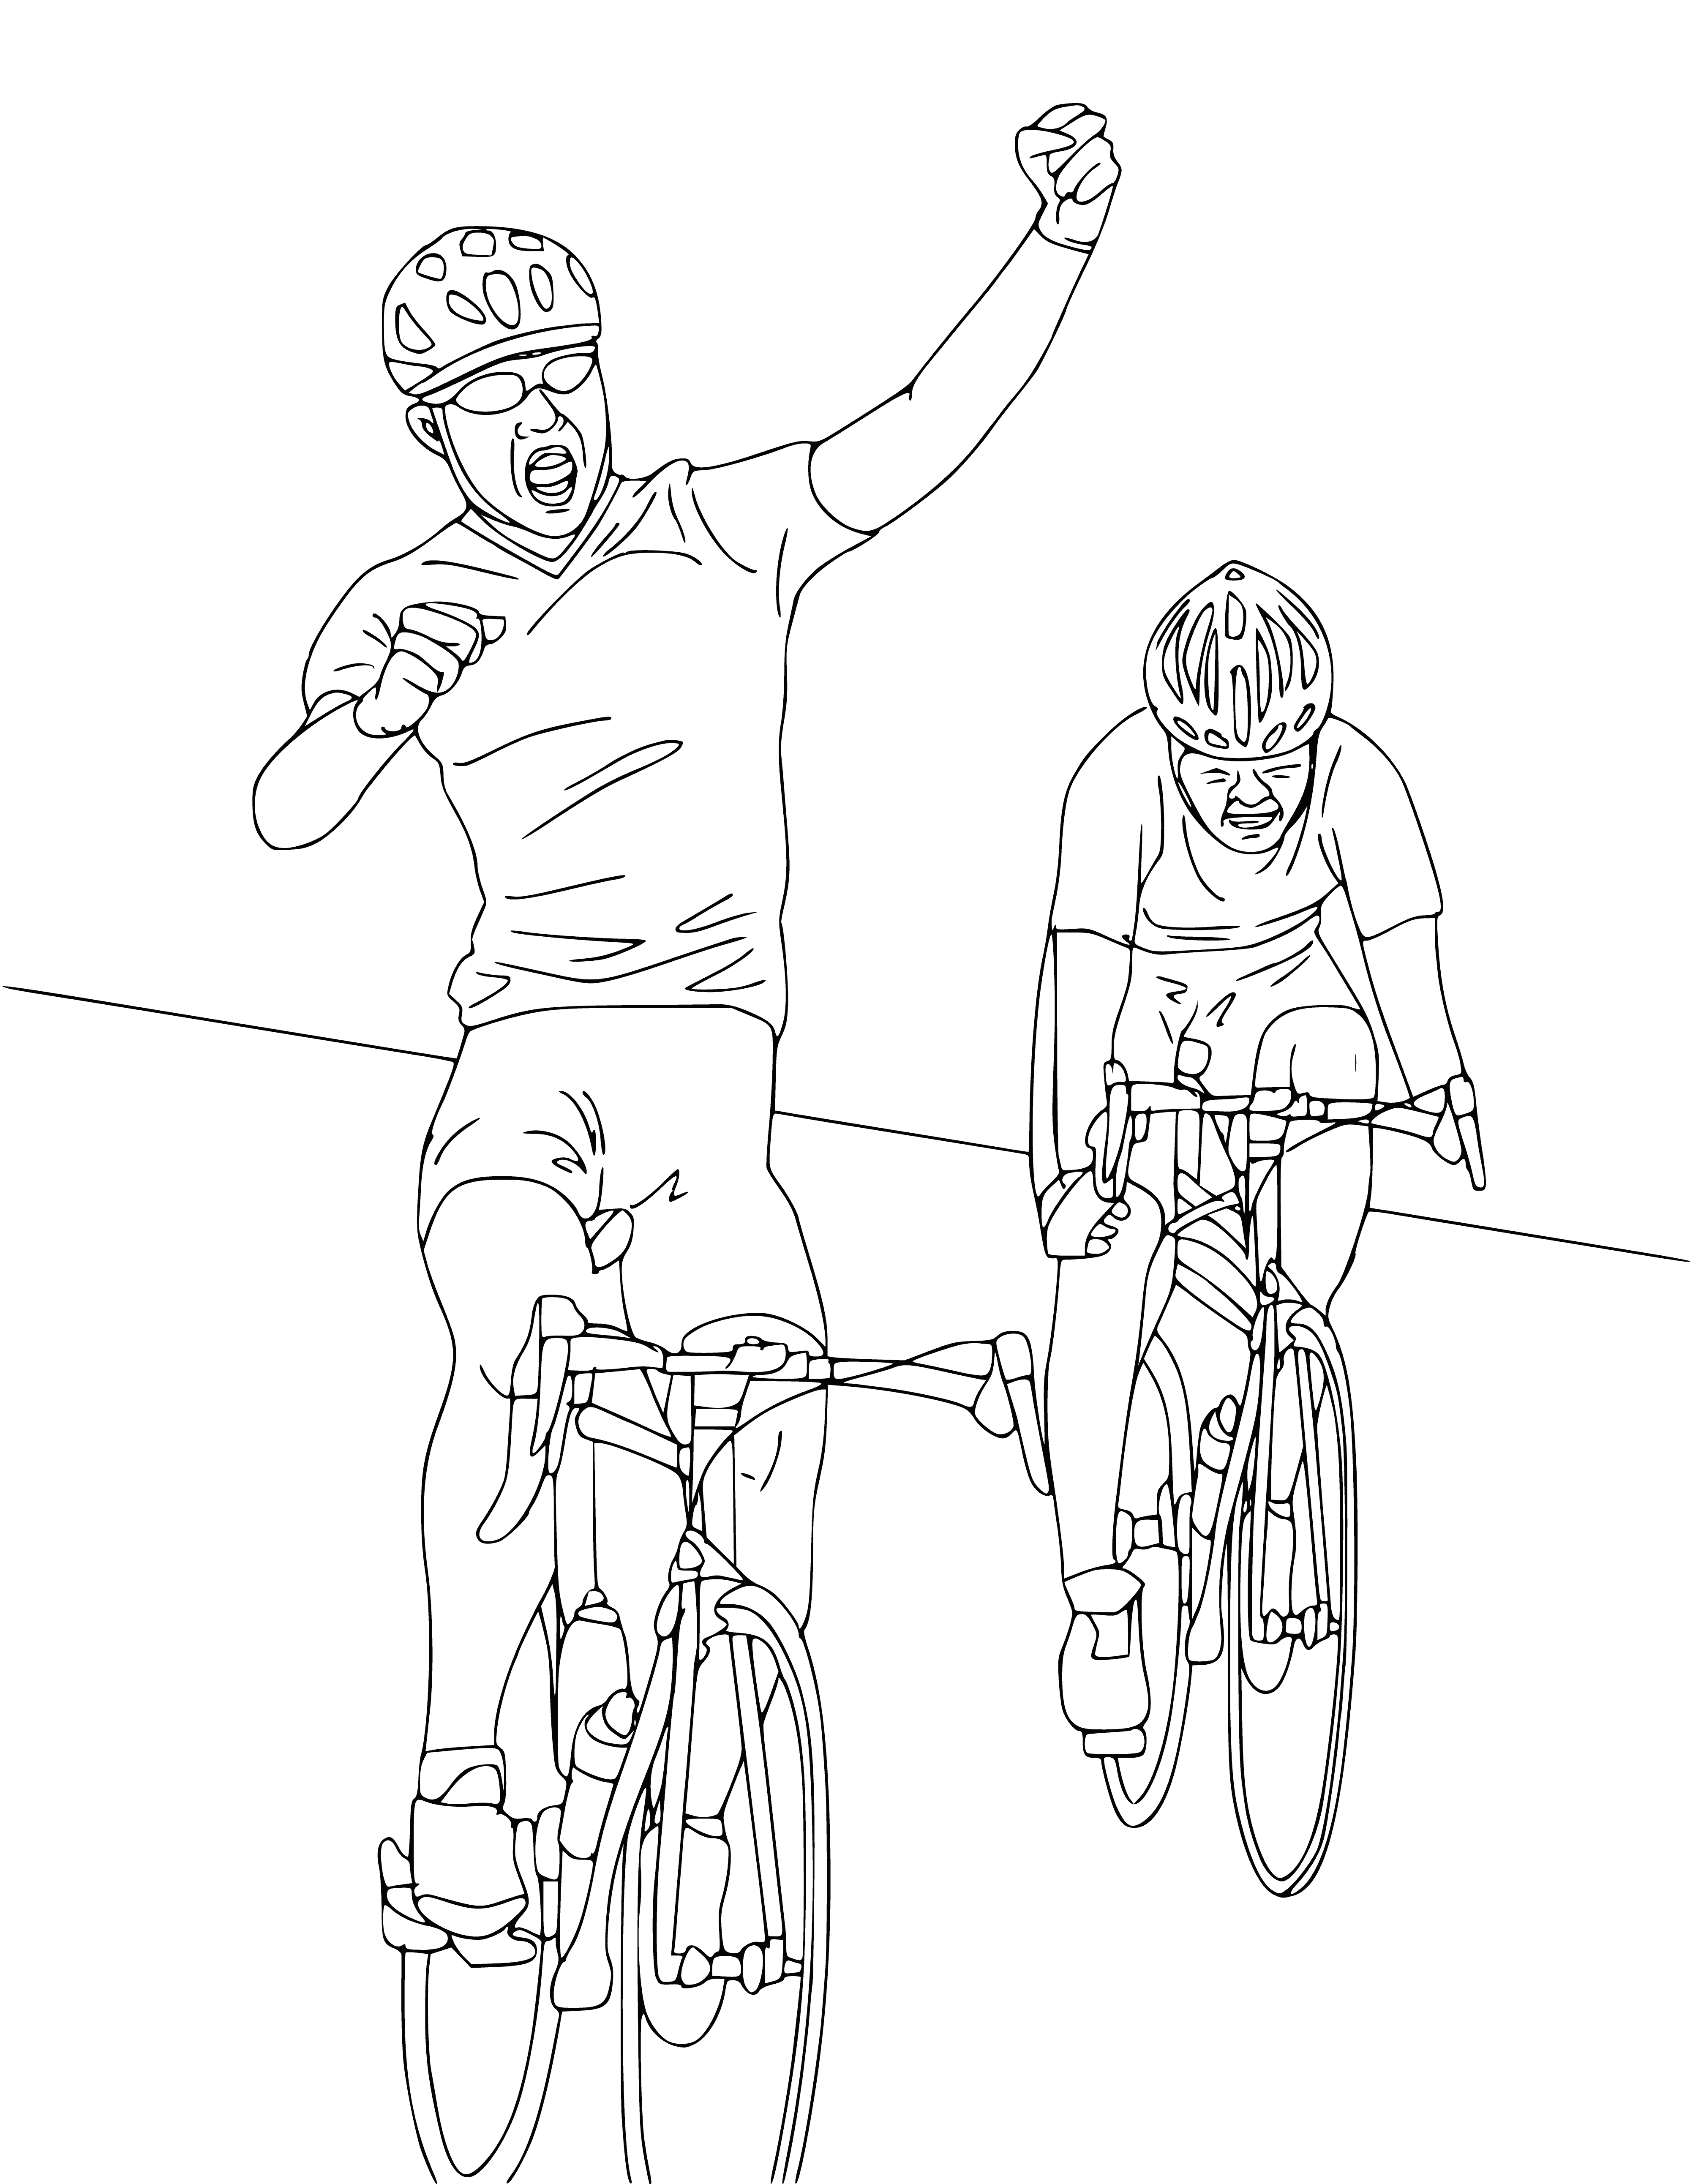 coloring page: 140 characters: Coloring page of a bike race with bikes and riders racing to the finish line.